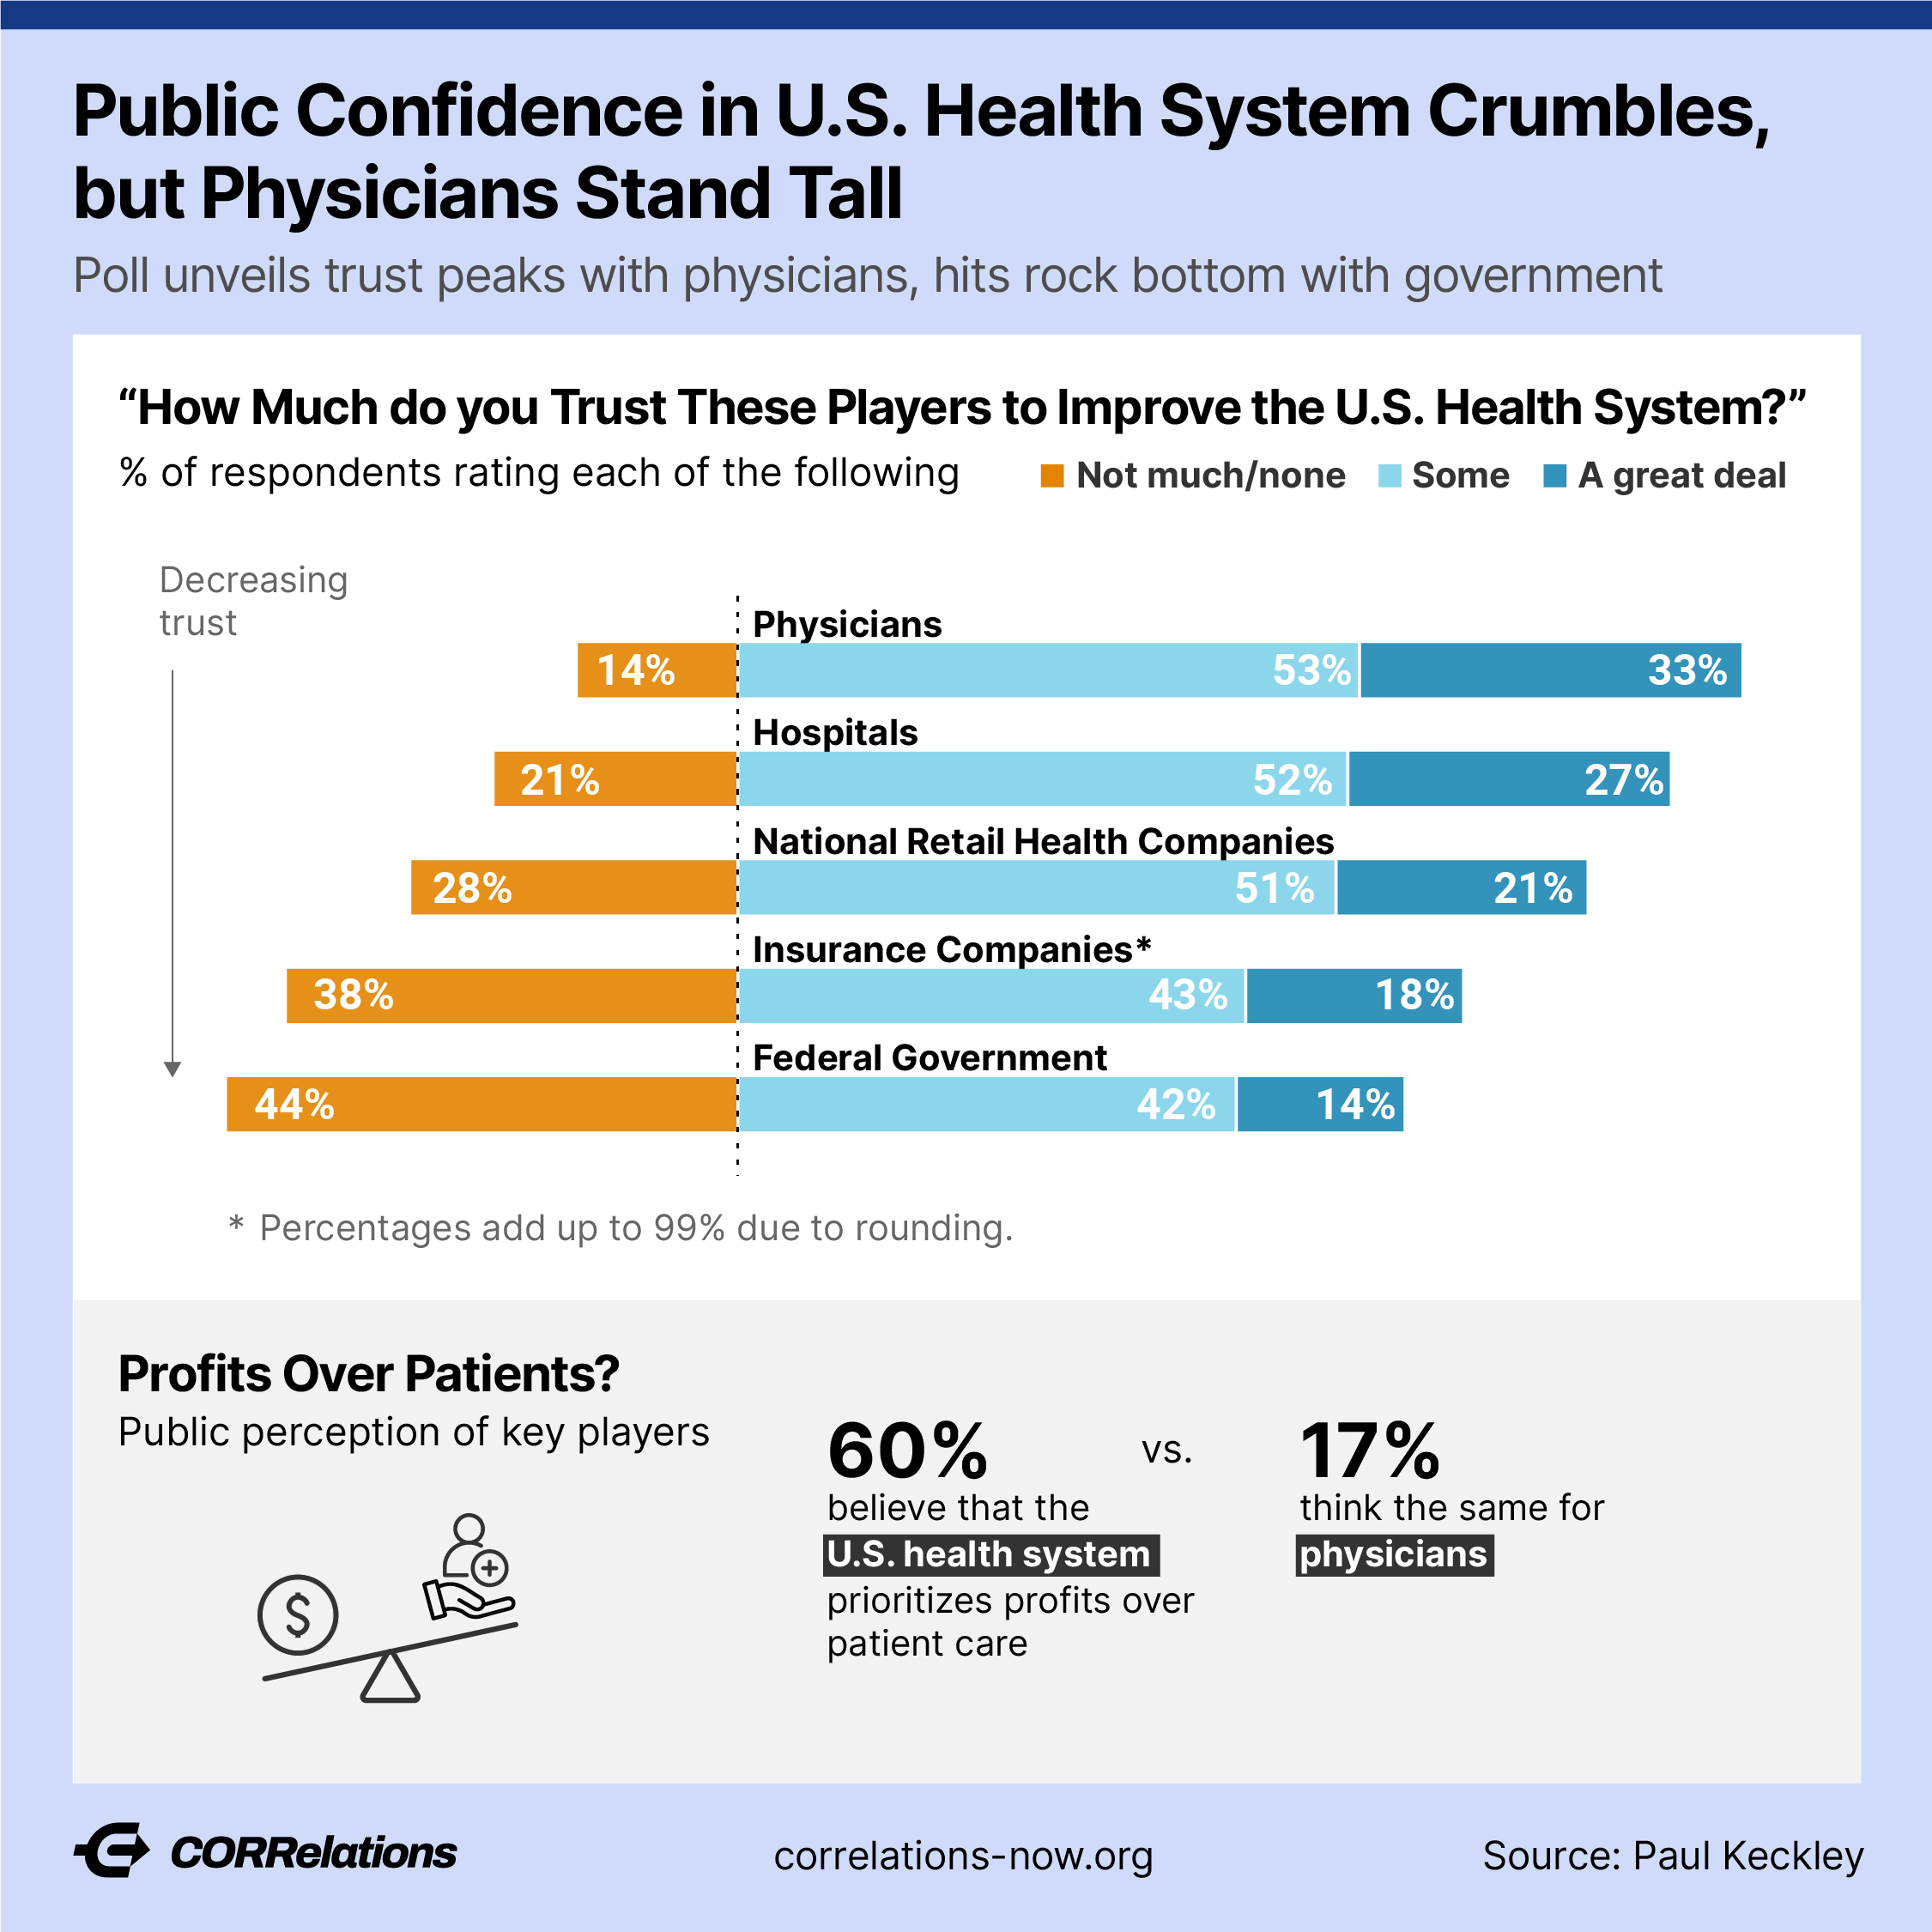 U.S. Healthcare: Perceptions About Margin and Mission